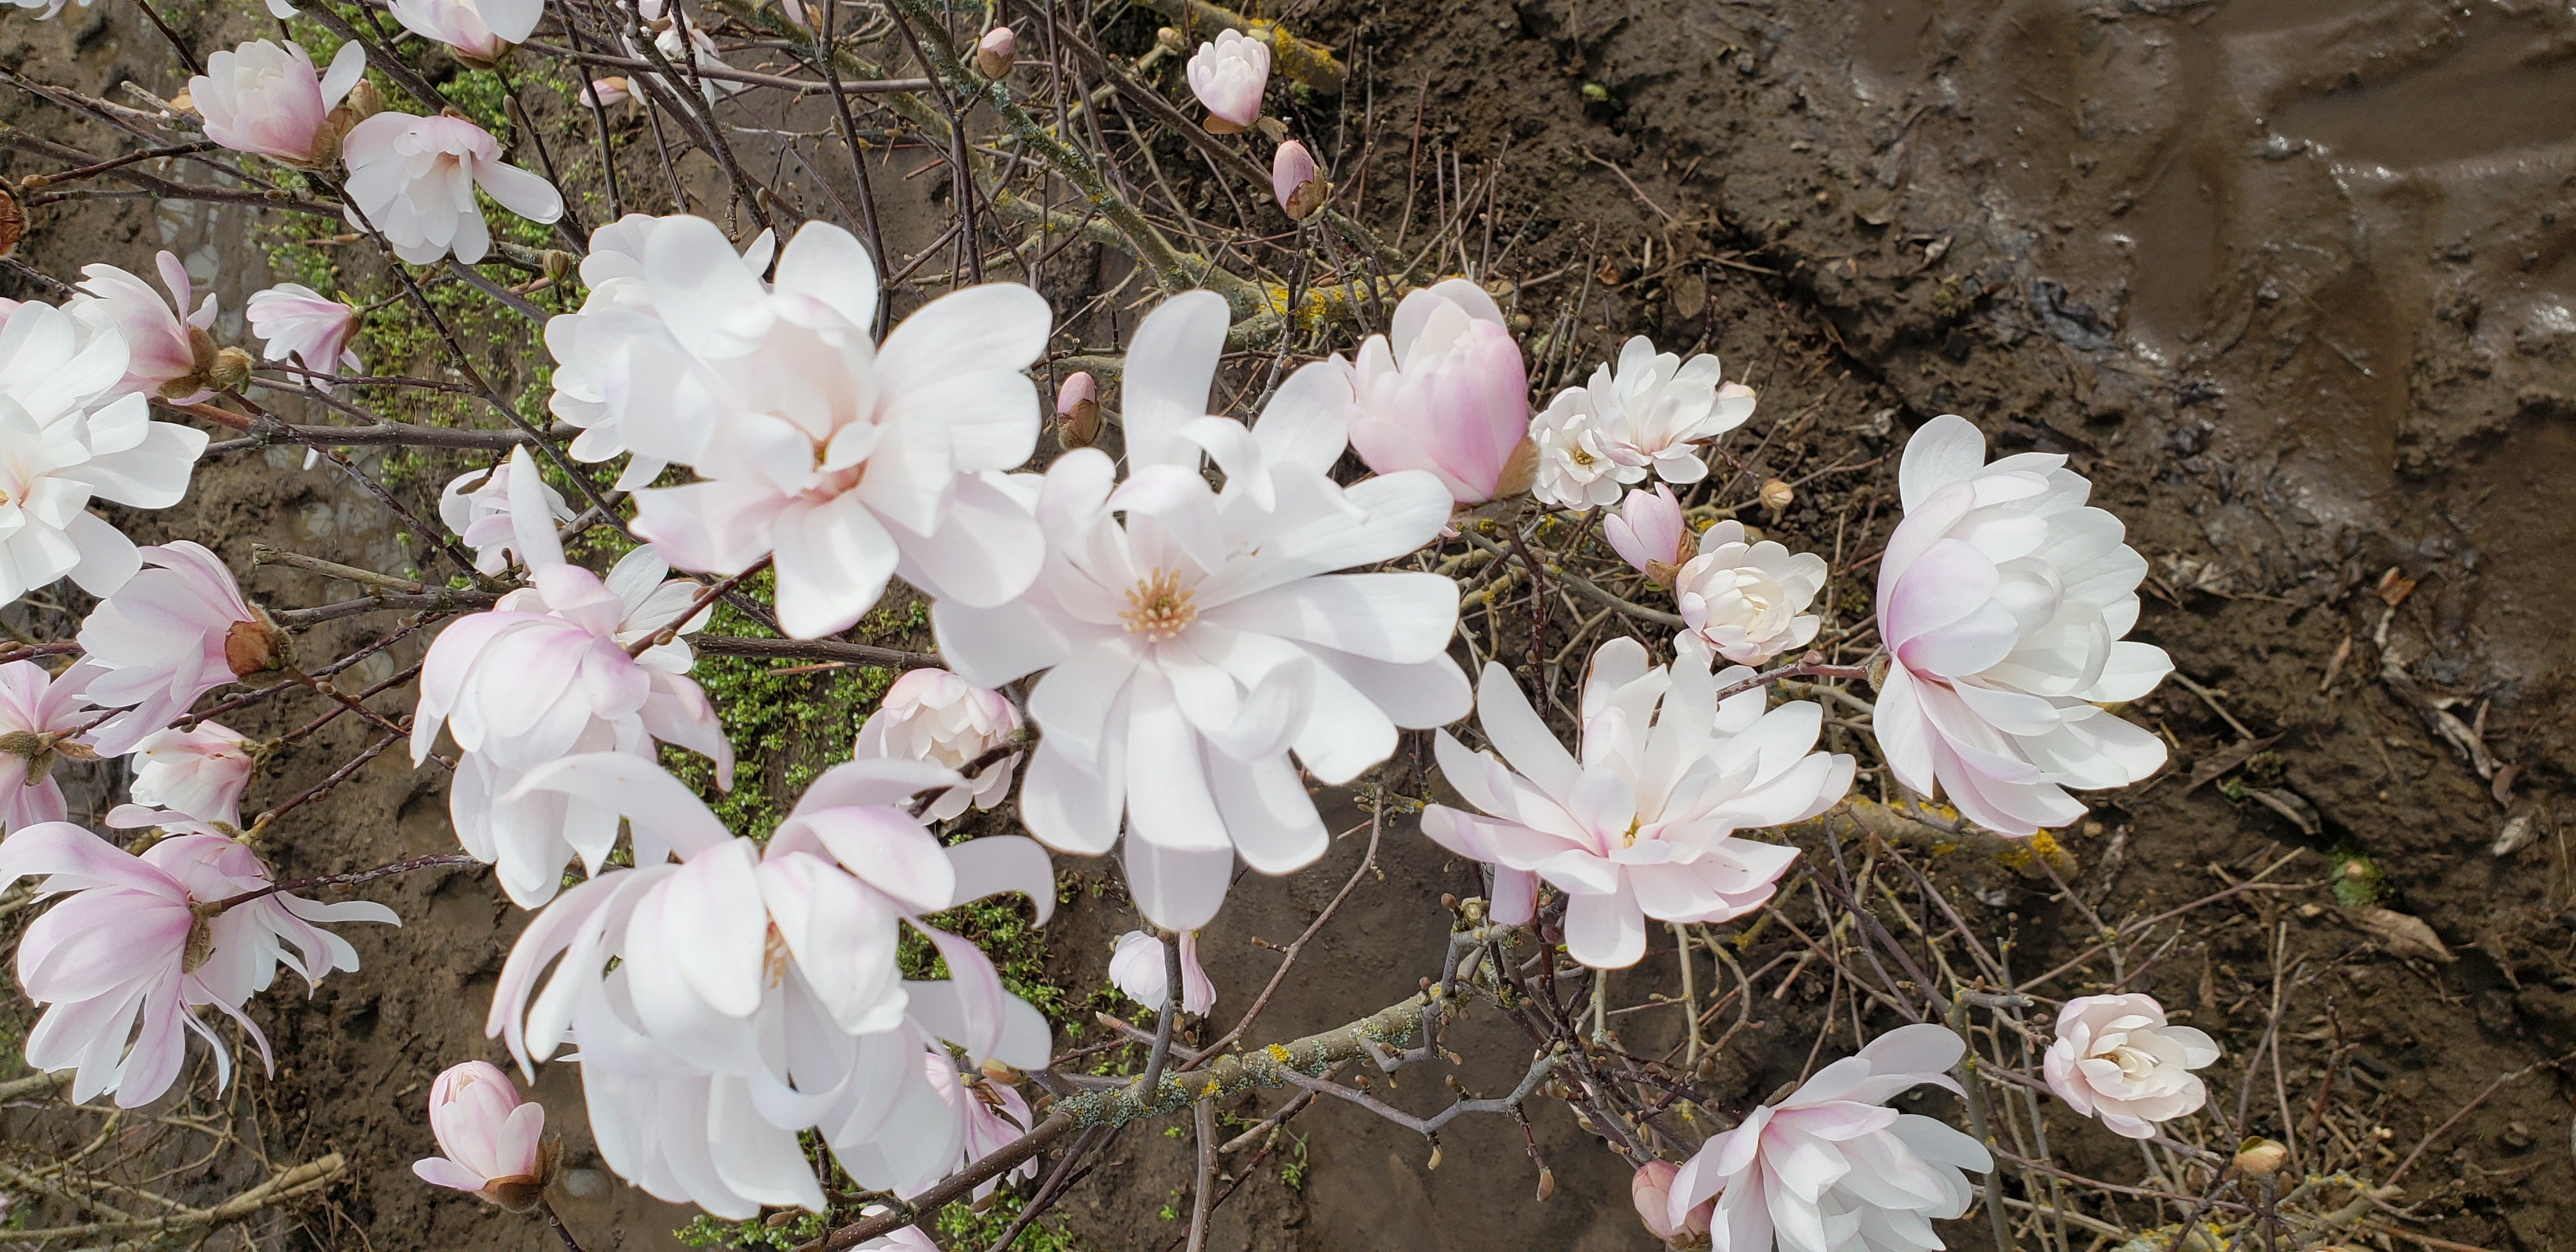 star magnolia growth rate